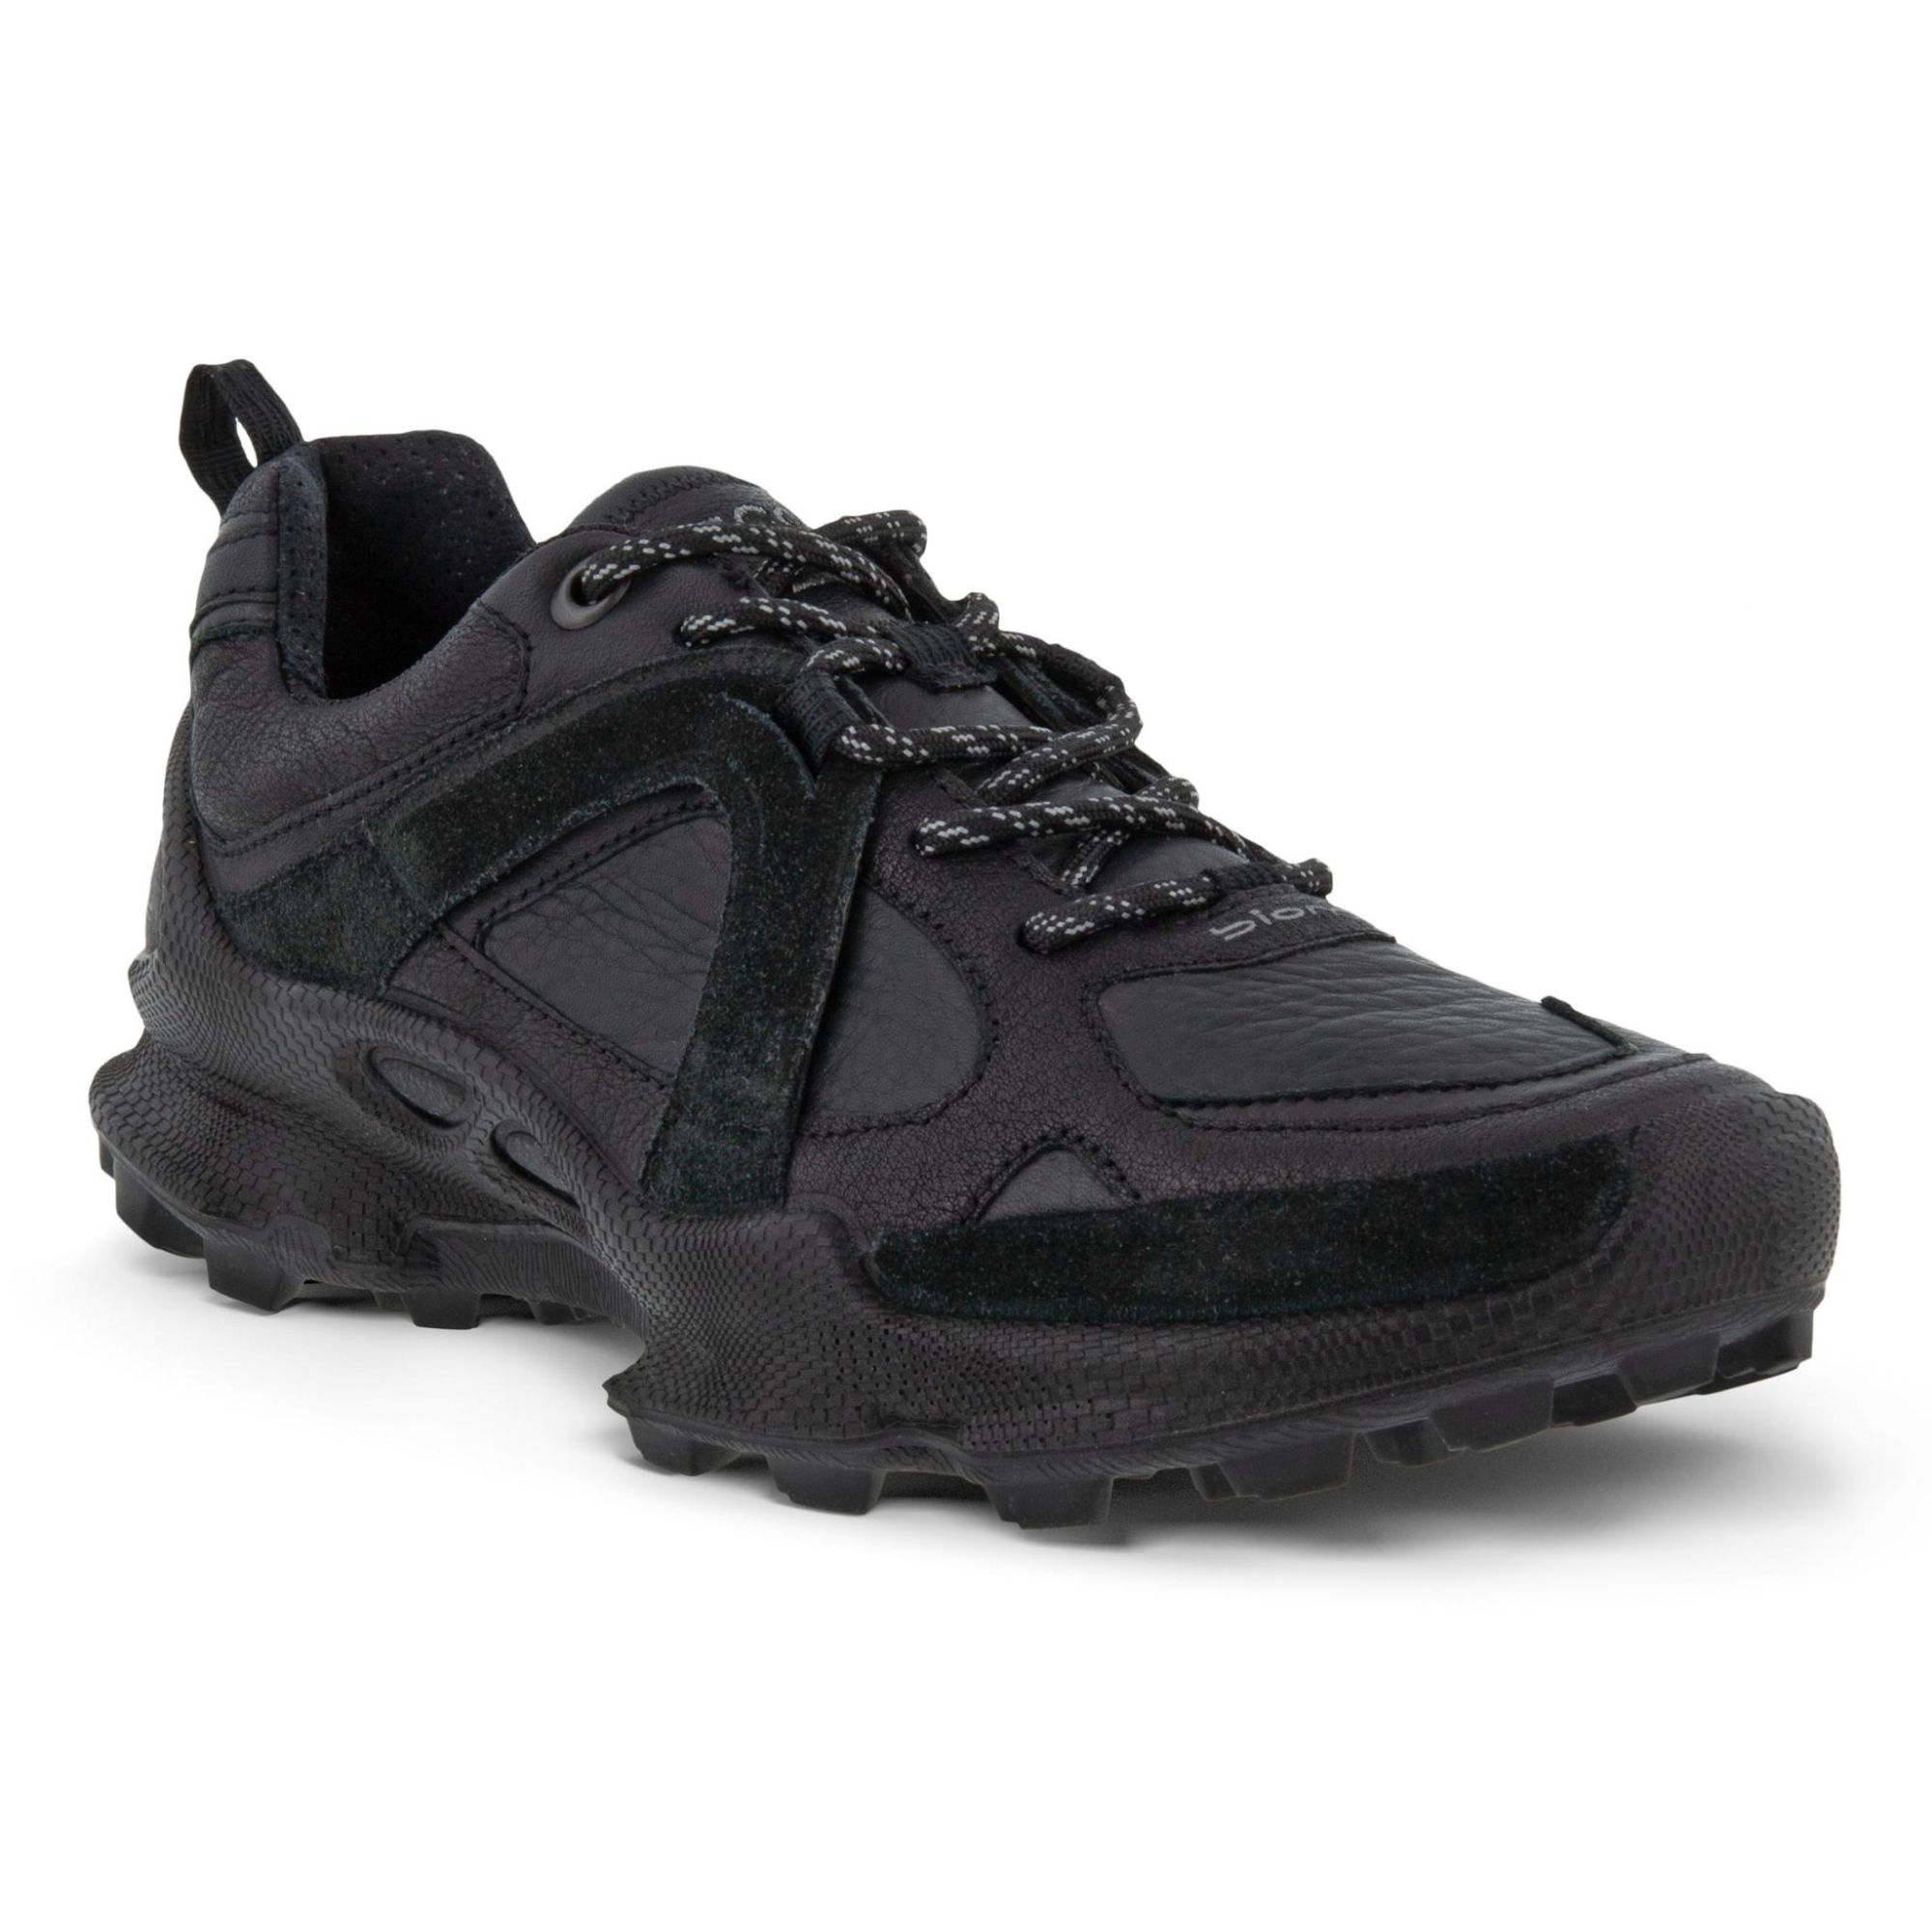 Ecco BIOM C-TRAIL LOW LEA 38 - Products - Veryk Mall - Veryk Mall, many product, quick response, safe your money!